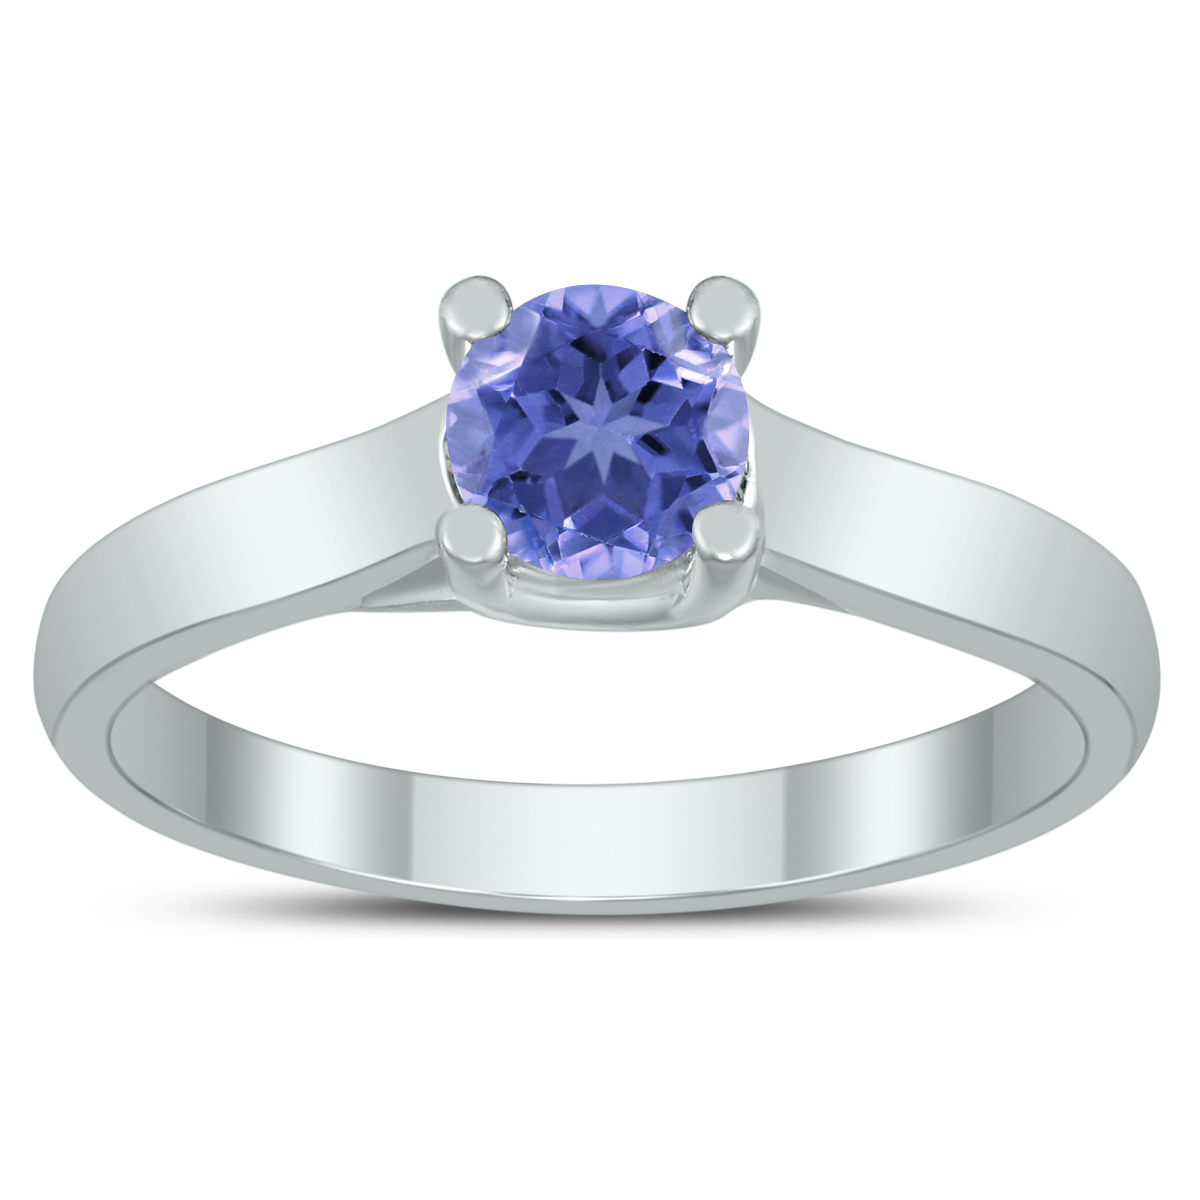 Round 5MM Tanzanite Cathedral Solitaire Ring in 10K White Gold